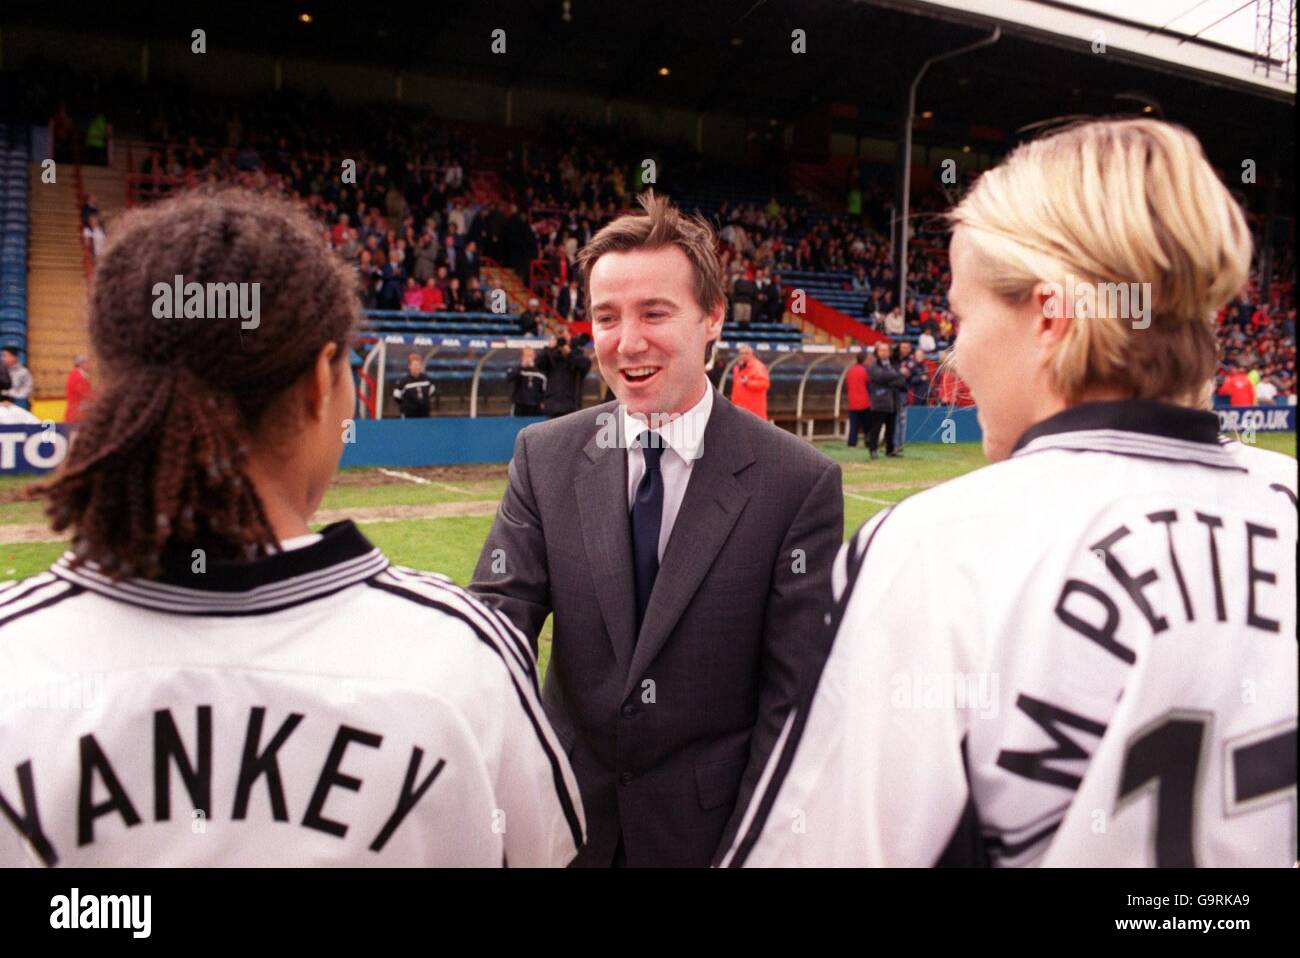 Women's Soccer - AXA FA Cup Final - Arsenal v Fulham. FA Chief Executive Adam Crozier (c) is introduced to Fulham's Rachel Yankey (l) as teammate Marianne Pettersen (r) looks on Stock Photo